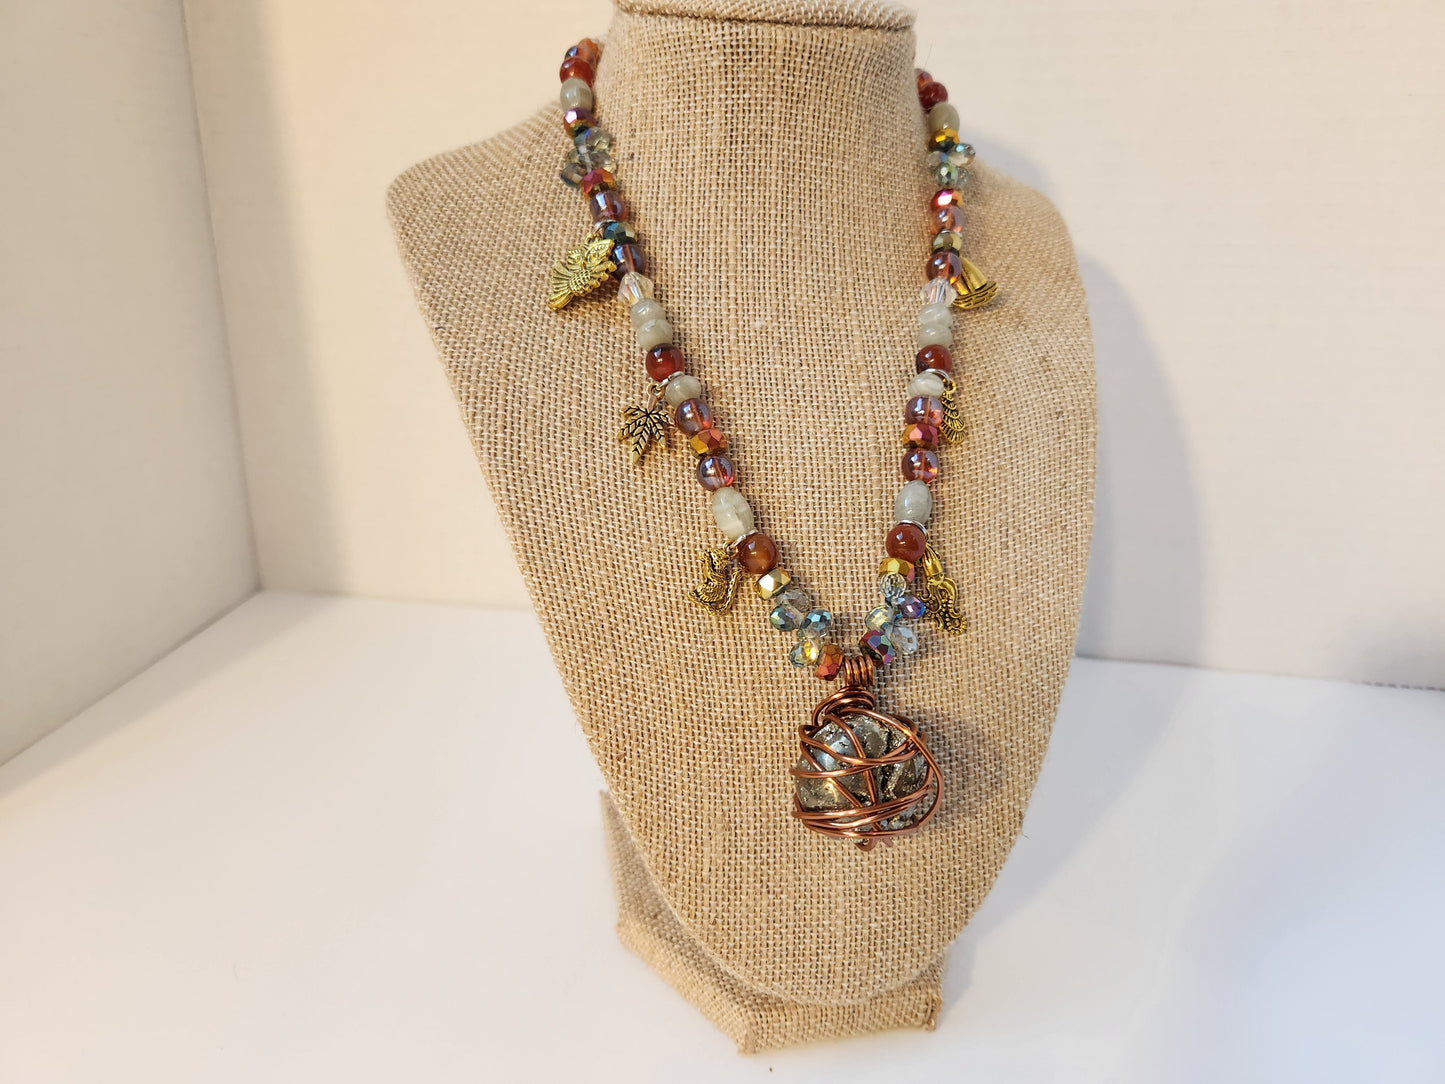 Pyrite Necklace with Charms, Wire Wrap Crystal Necklace